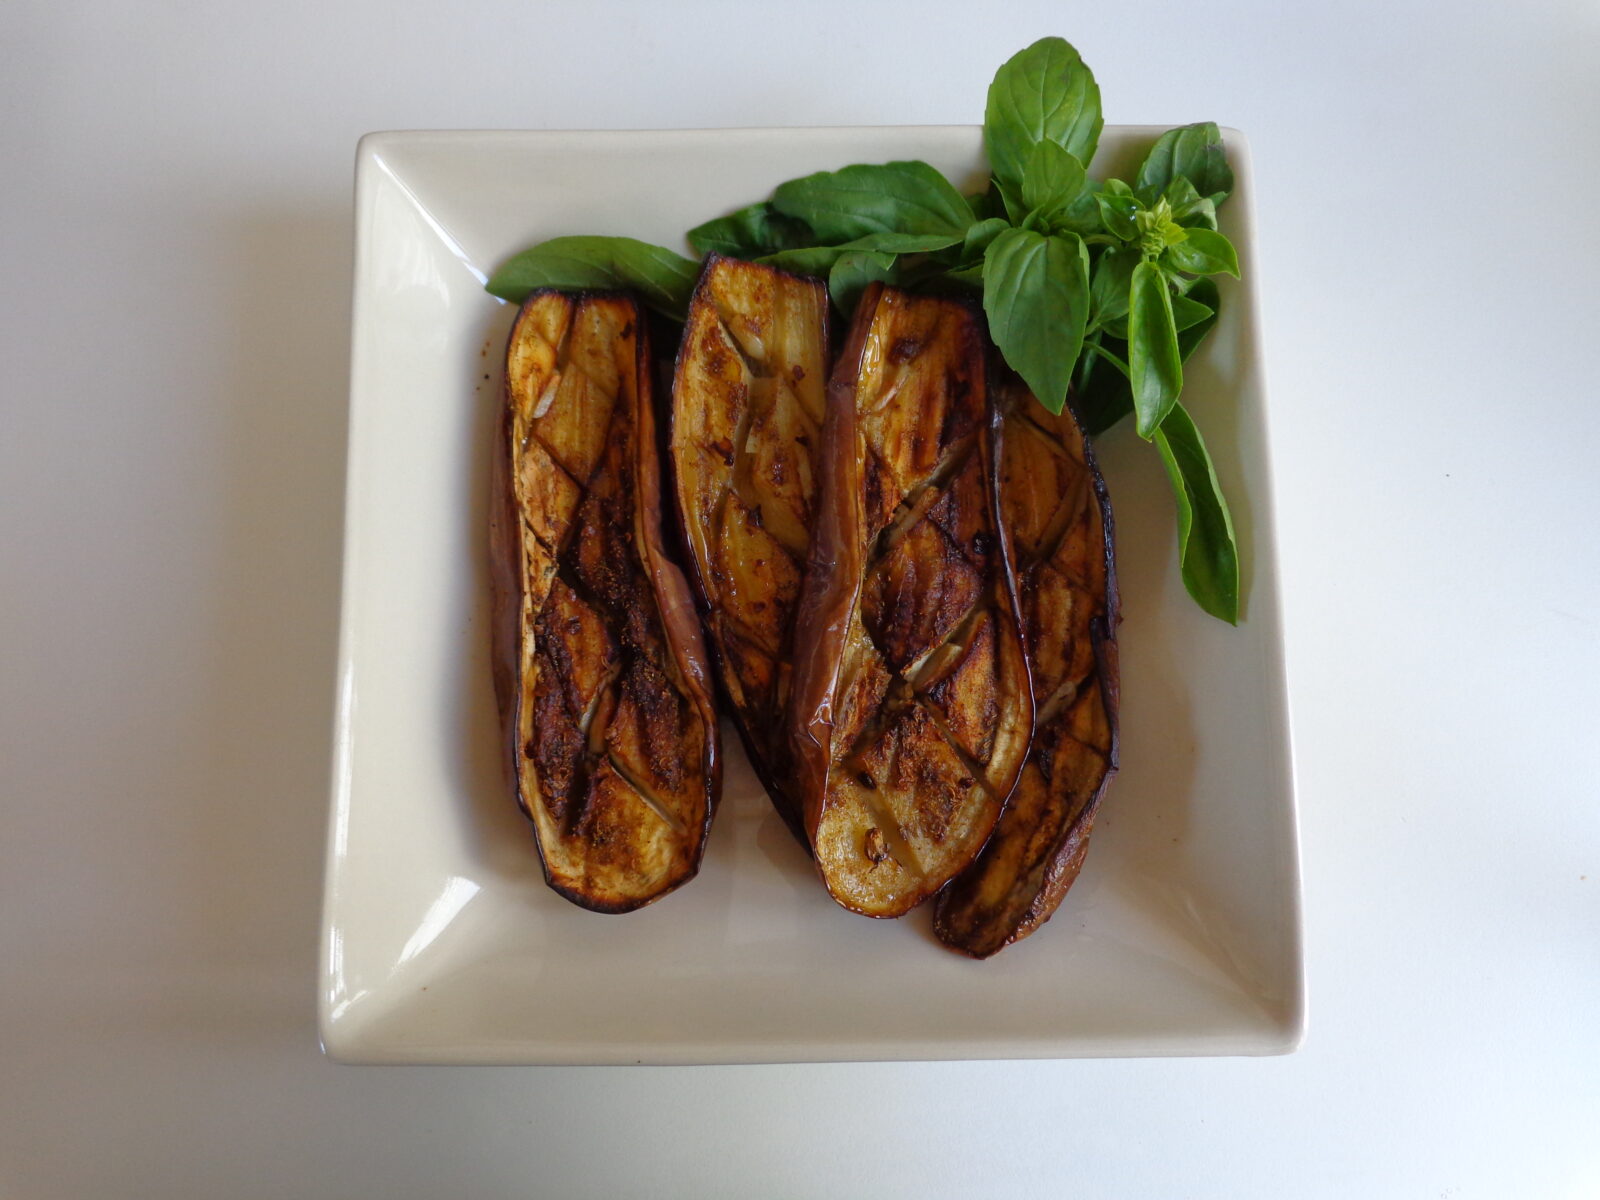 Oven Roasted Eggplant Mediterranean Style The Everyday French Chefthe Everyday French Chef